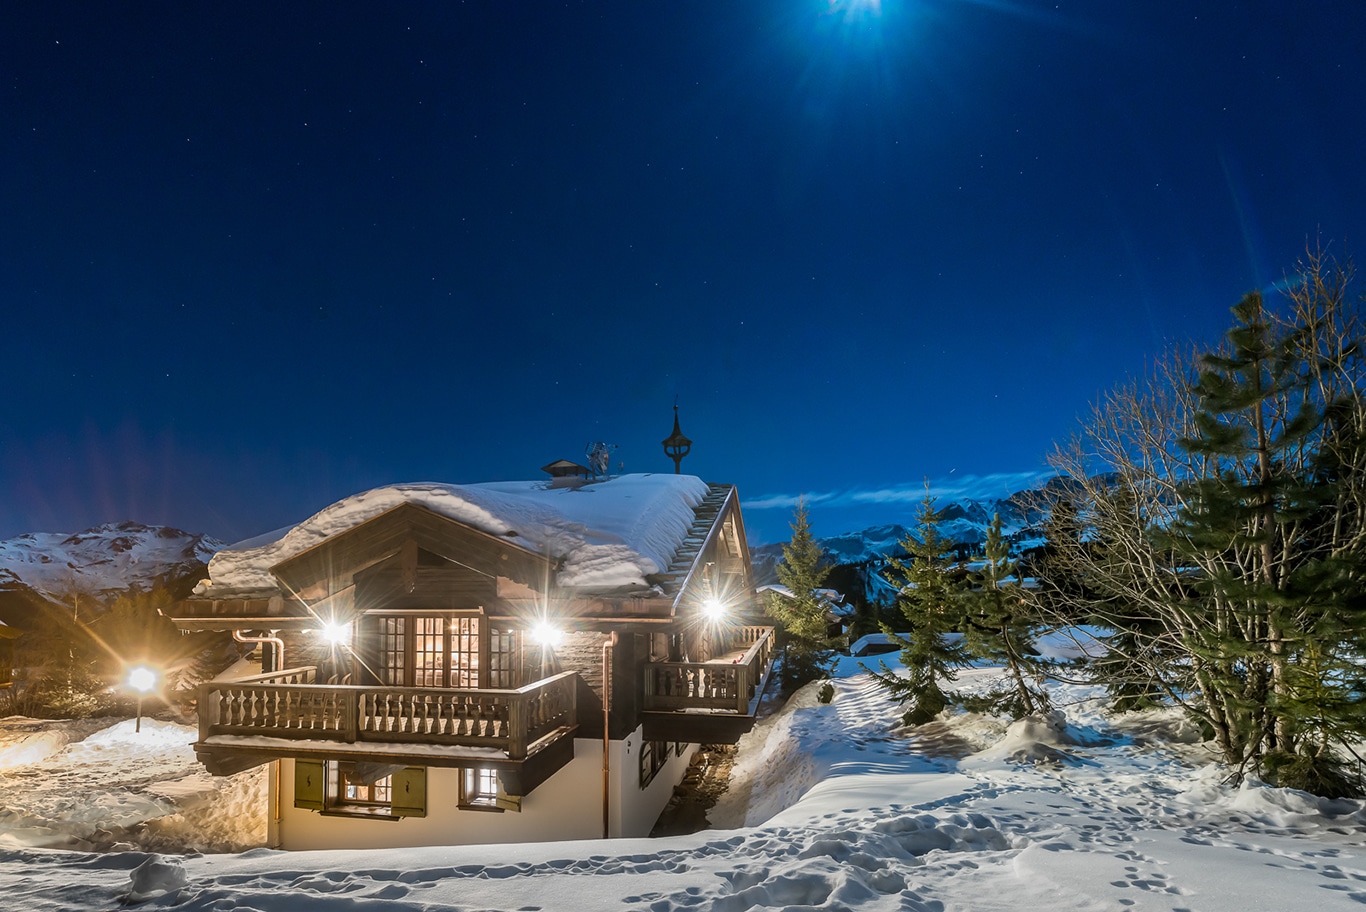 Chalet Namaste Courchevel 1850 View from the Piste